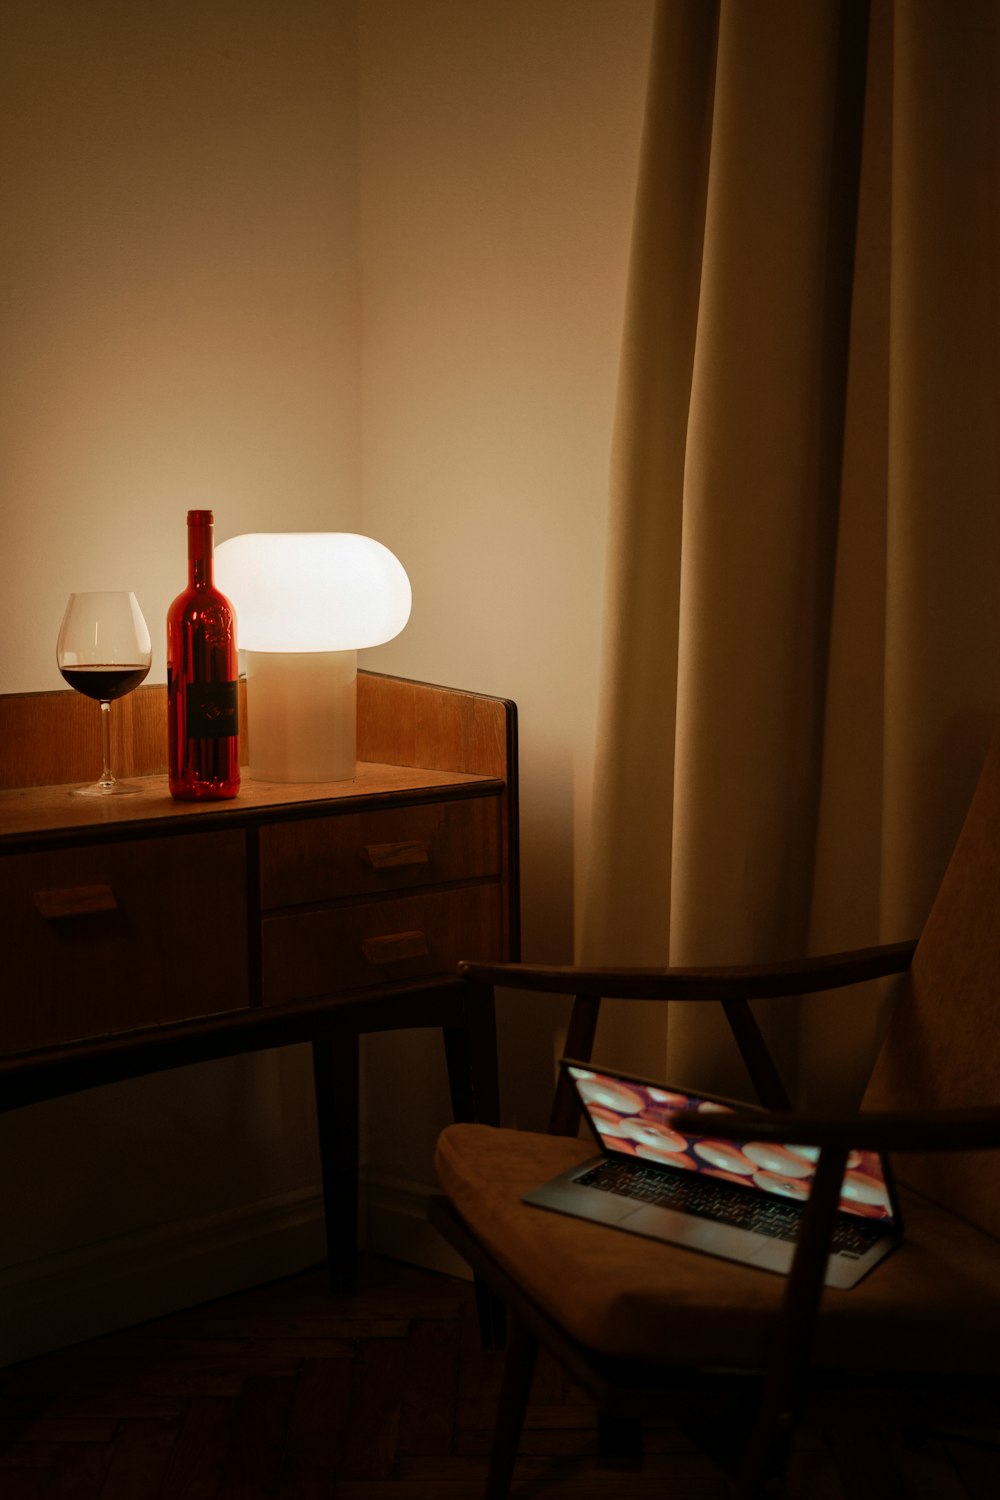 a bottle of wine sitting on a table next to a lamp